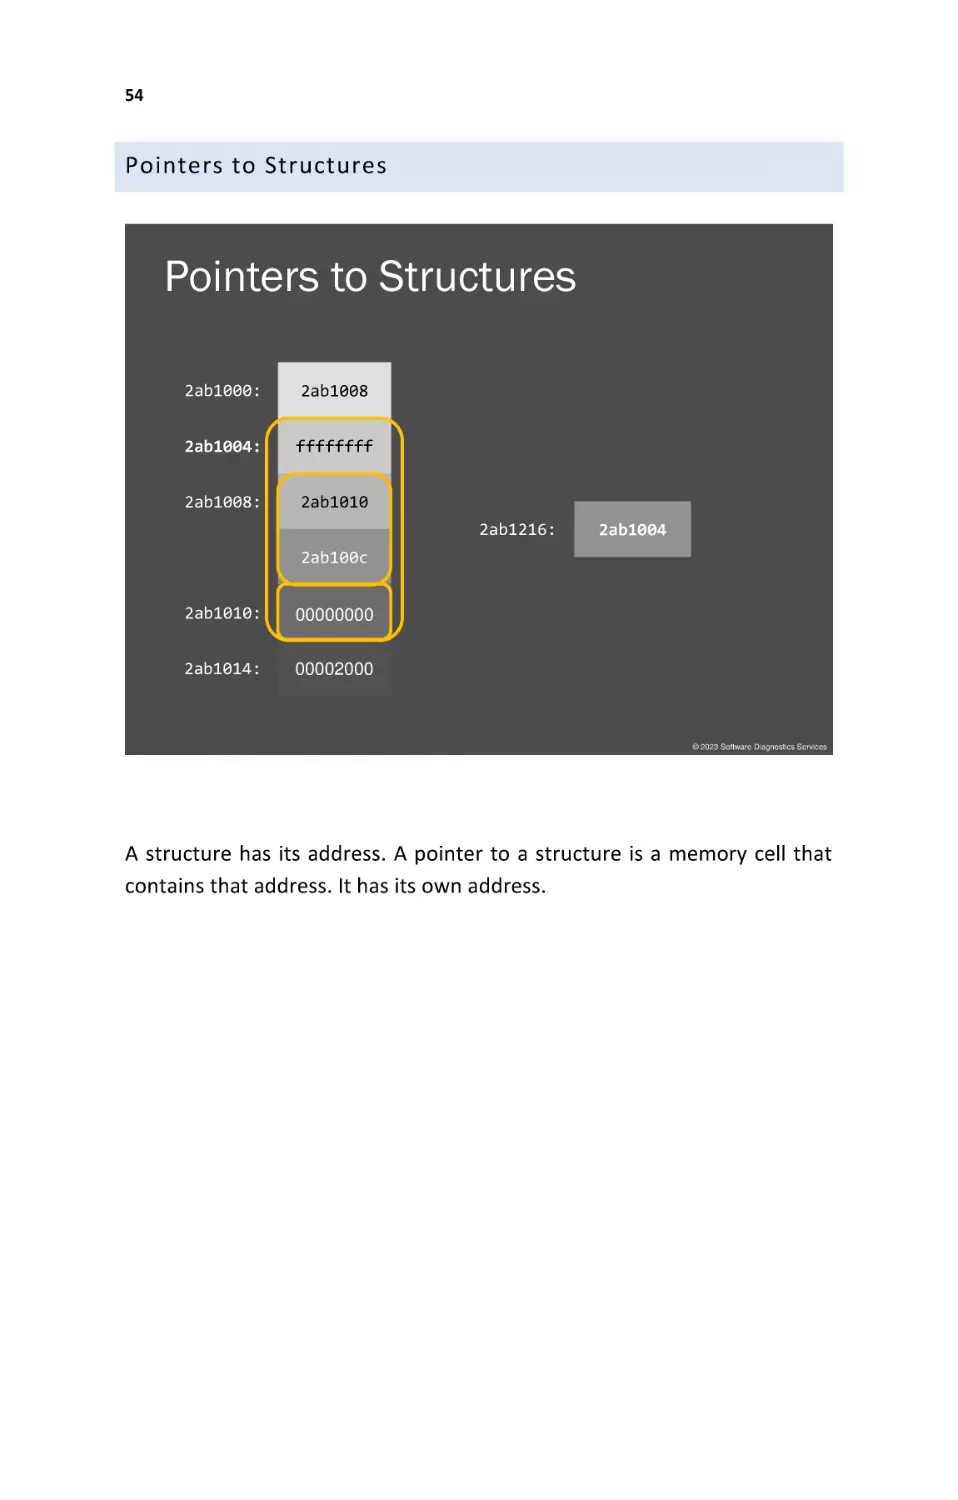 Pointers to Structures